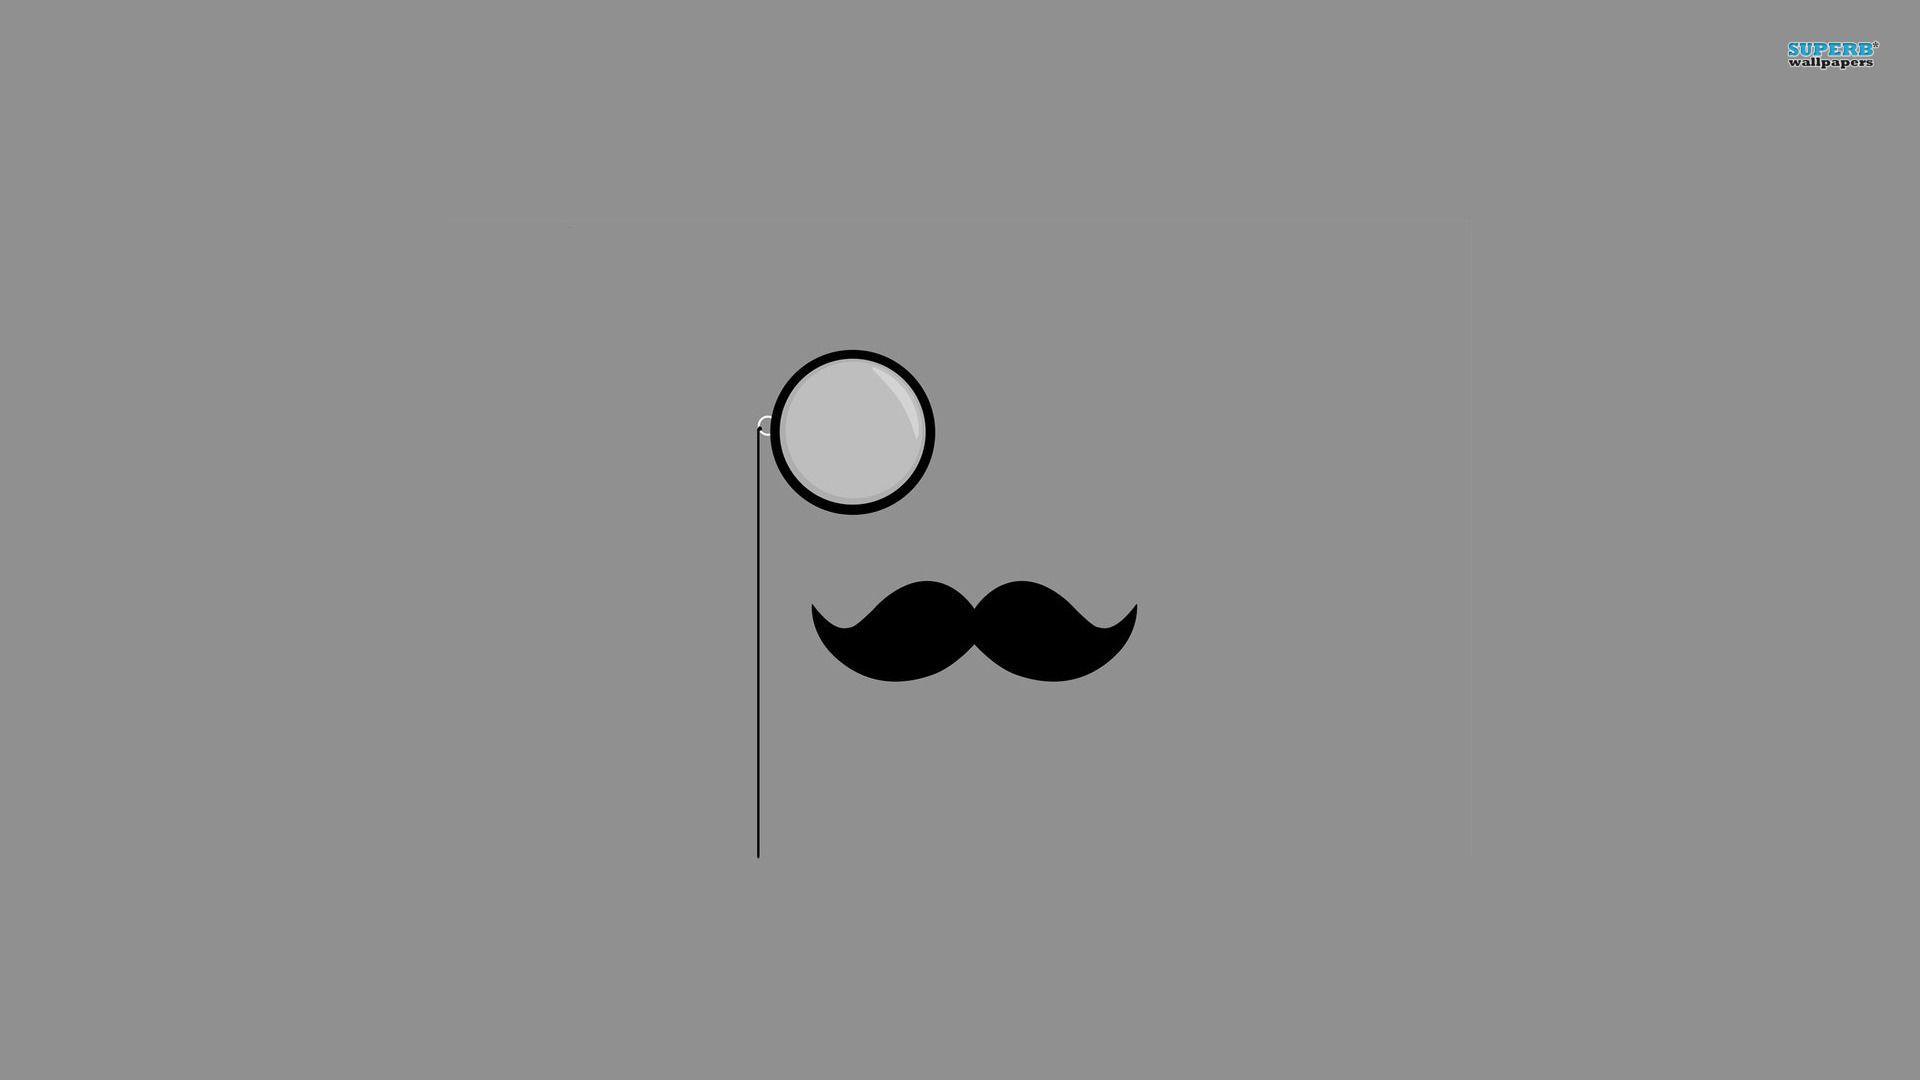 Awesome Cute Mustache Wallpaper Tumblr te image about Mustache